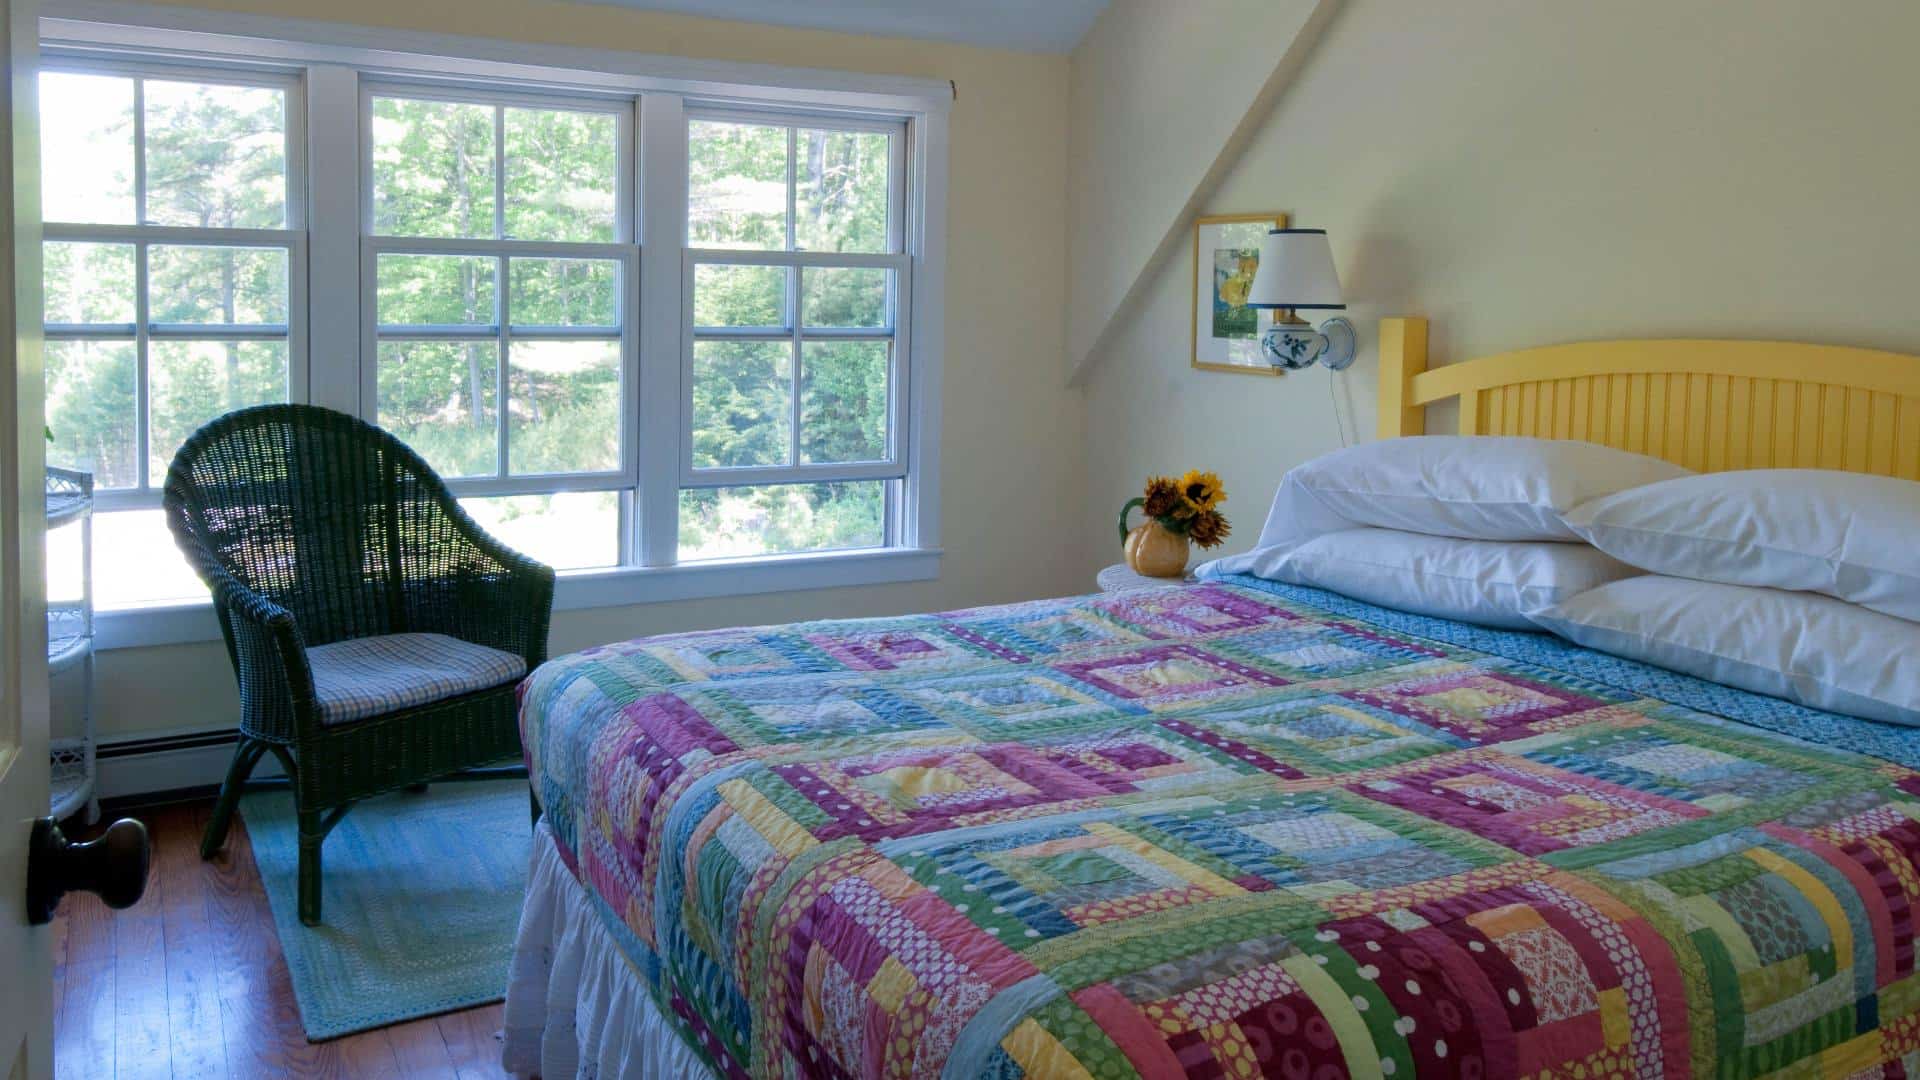 Bright and airy bedroom with three large windows, sloped ceiling and yellow bed made up in a colorful quilt next to a wicker armchair with a padded seat.